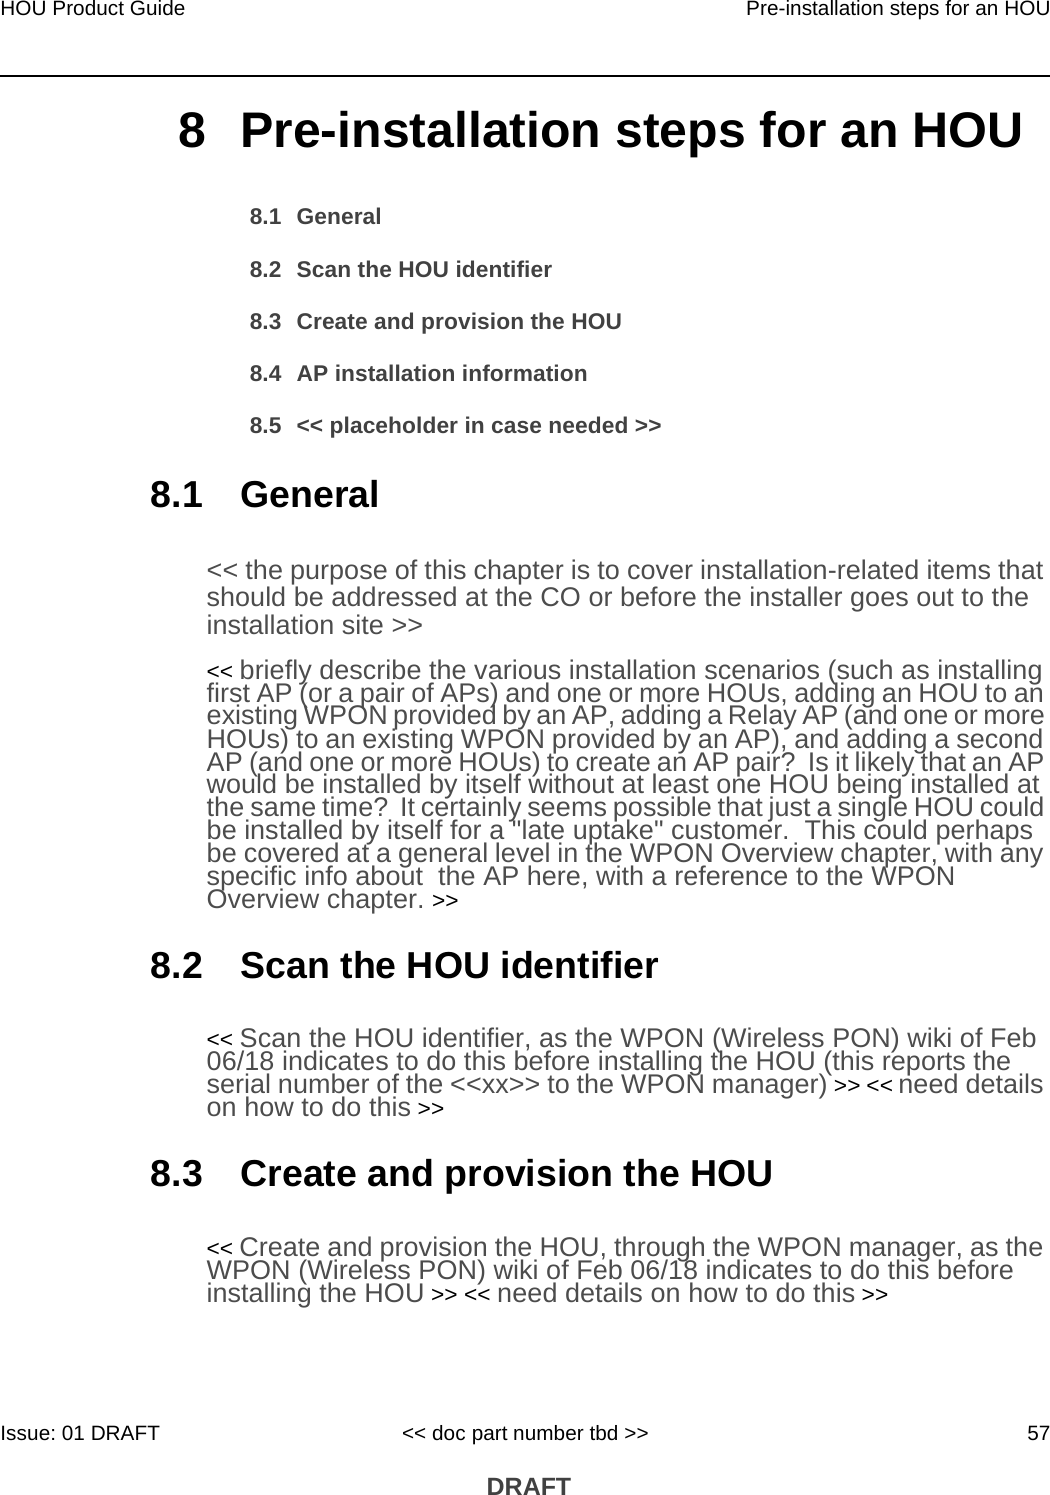 HOU Product Guide Pre-installation steps for an HOUIssue: 01 DRAFT &lt;&lt; doc part number tbd &gt;&gt; 57 DRAFT8 Pre-installation steps for an HOU8.1 General8.2 Scan the HOU identifier8.3 Create and provision the HOU8.4 AP installation information8.5 &lt;&lt; placeholder in case needed &gt;&gt;8.1 General&lt;&lt; the purpose of this chapter is to cover installation-related items that should be addressed at the CO or before the installer goes out to the installation site &gt;&gt;&lt;&lt; briefly describe the various installation scenarios (such as installing first AP (or a pair of APs) and one or more HOUs, adding an HOU to an existing WPON provided by an AP, adding a Relay AP (and one or more HOUs) to an existing WPON provided by an AP), and adding a second AP (and one or more HOUs) to create an AP pair?  Is it likely that an AP would be installed by itself without at least one HOU being installed at the same time?  It certainly seems possible that just a single HOU could be installed by itself for a &quot;late uptake&quot; customer.  This could perhaps be covered at a general level in the WPON Overview chapter, with any specific info about  the AP here, with a reference to the WPON Overview chapter. &gt;&gt;8.2 Scan the HOU identifier&lt;&lt; Scan the HOU identifier, as the WPON (Wireless PON) wiki of Feb 06/18 indicates to do this before installing the HOU (this reports the serial number of the &lt;&lt;xx&gt;&gt; to the WPON manager) &gt;&gt; &lt;&lt; need details on how to do this &gt;&gt;8.3 Create and provision the HOU&lt;&lt; Create and provision the HOU, through the WPON manager, as the WPON (Wireless PON) wiki of Feb 06/18 indicates to do this before installing the HOU &gt;&gt; &lt;&lt; need details on how to do this &gt;&gt;